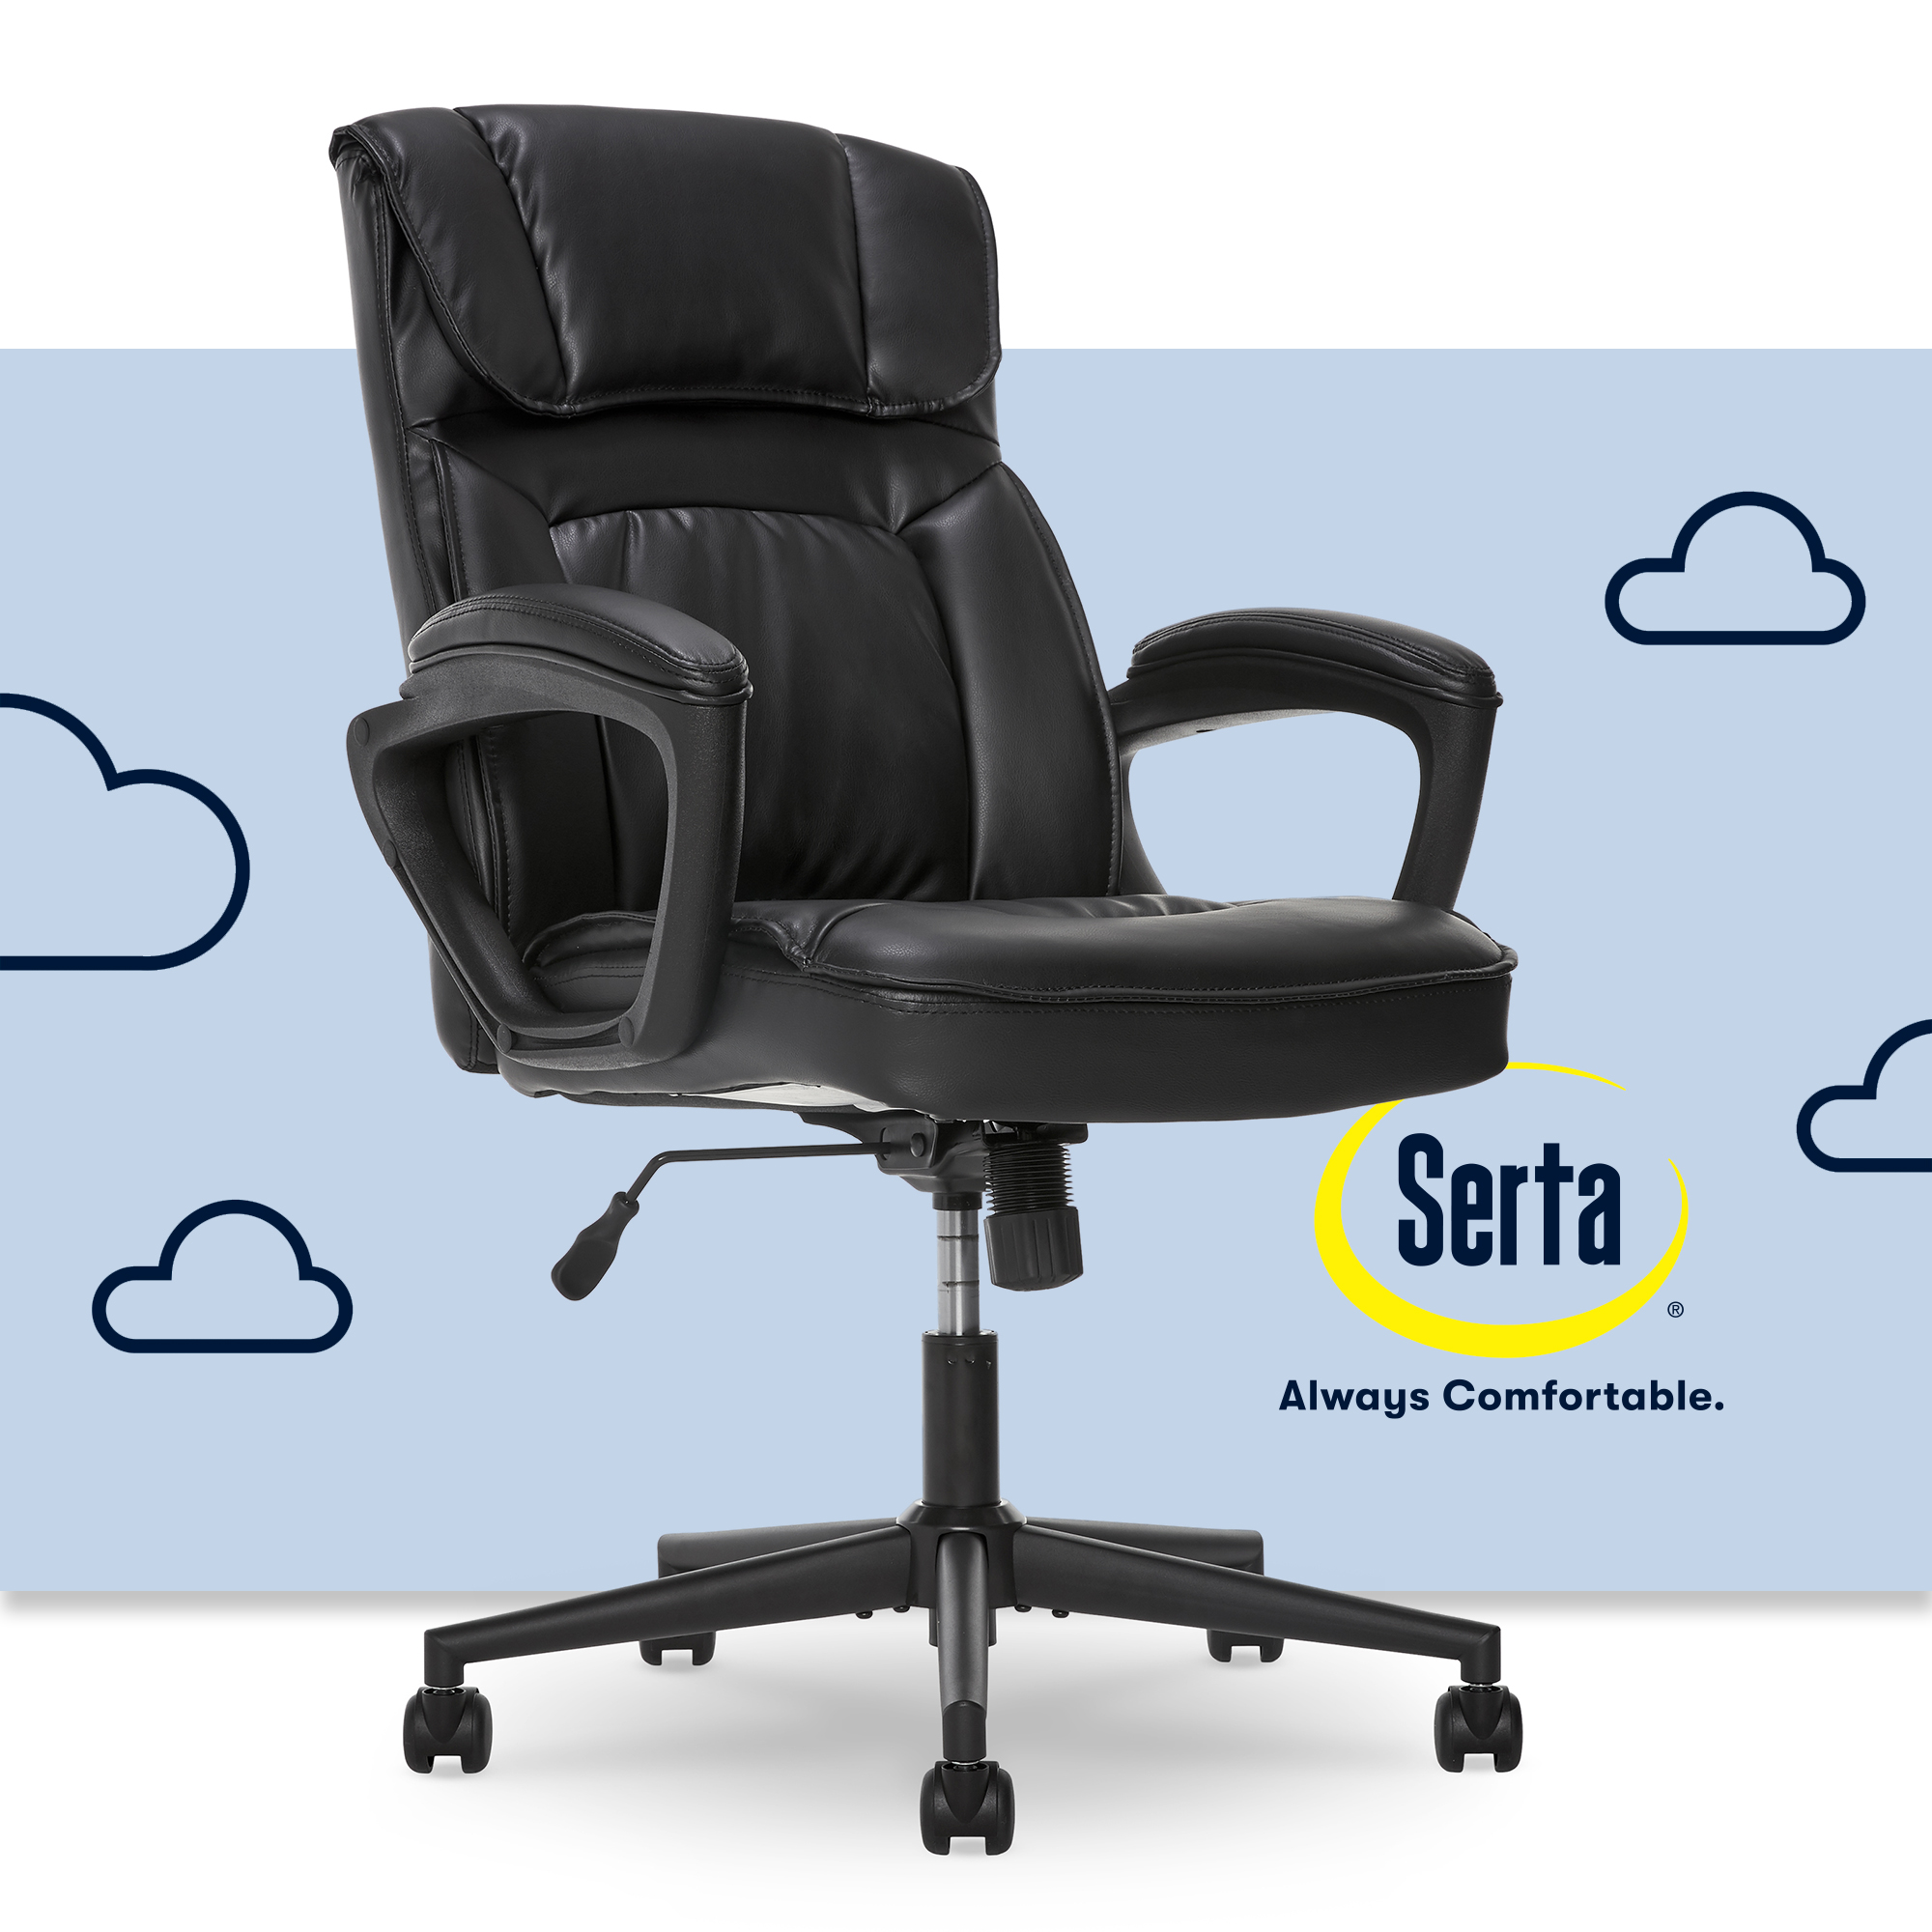 Serta Hannah Upholstered Executive Office Chair with Pillowed Headrest  Smooth Bonded Leather Black 43670FOSS - Best Buy